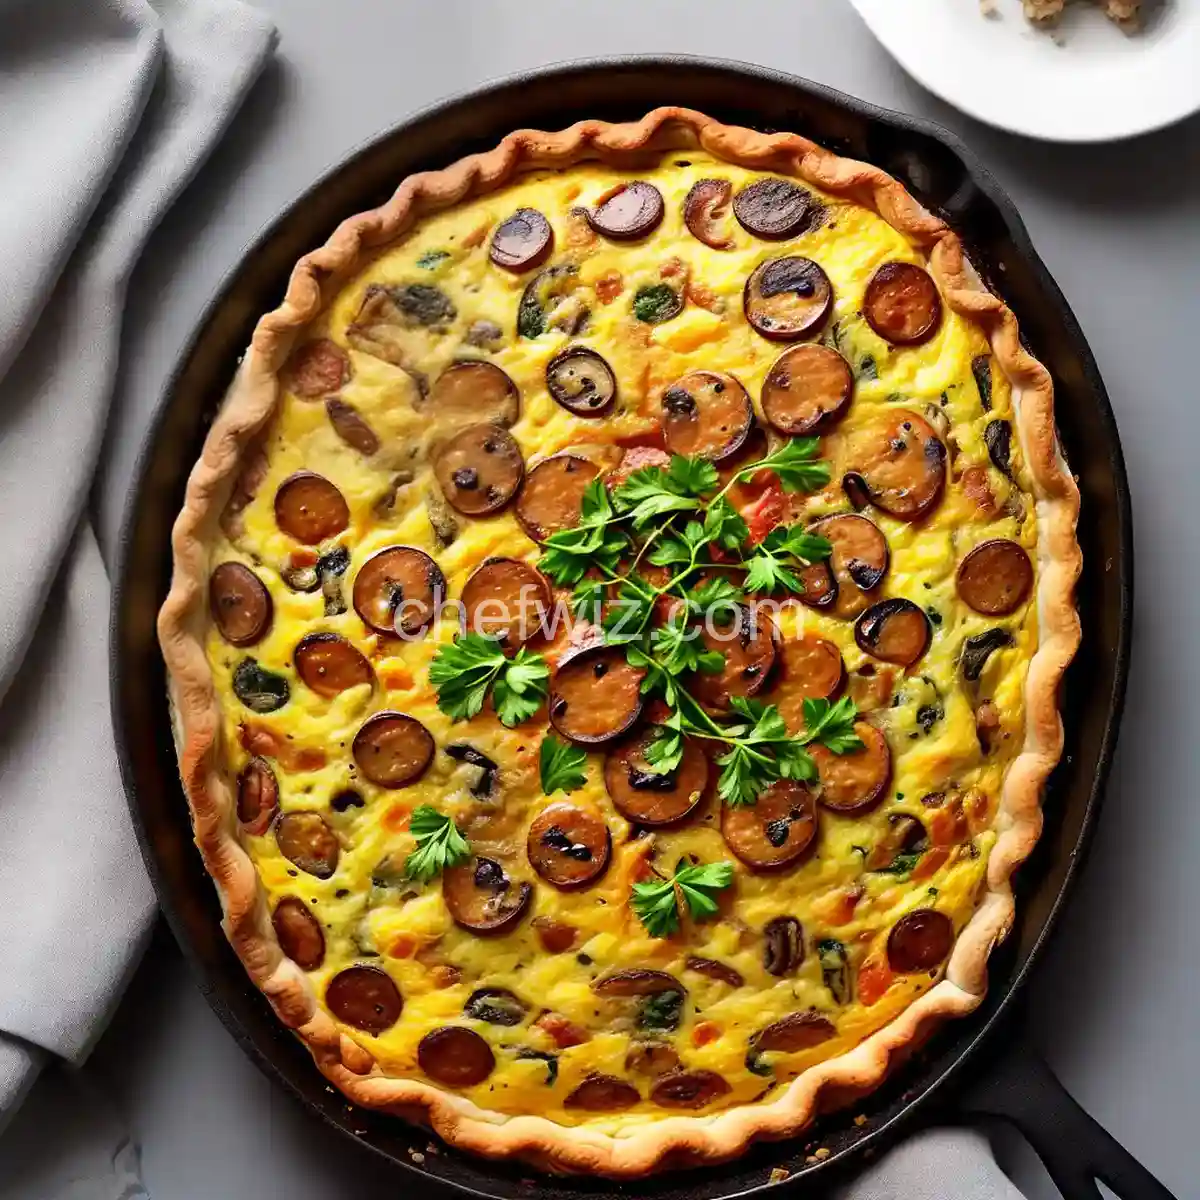 Sausage Mushroom Quiche - Recipes. Food. Cooking. Eating. Dinner ideas ...